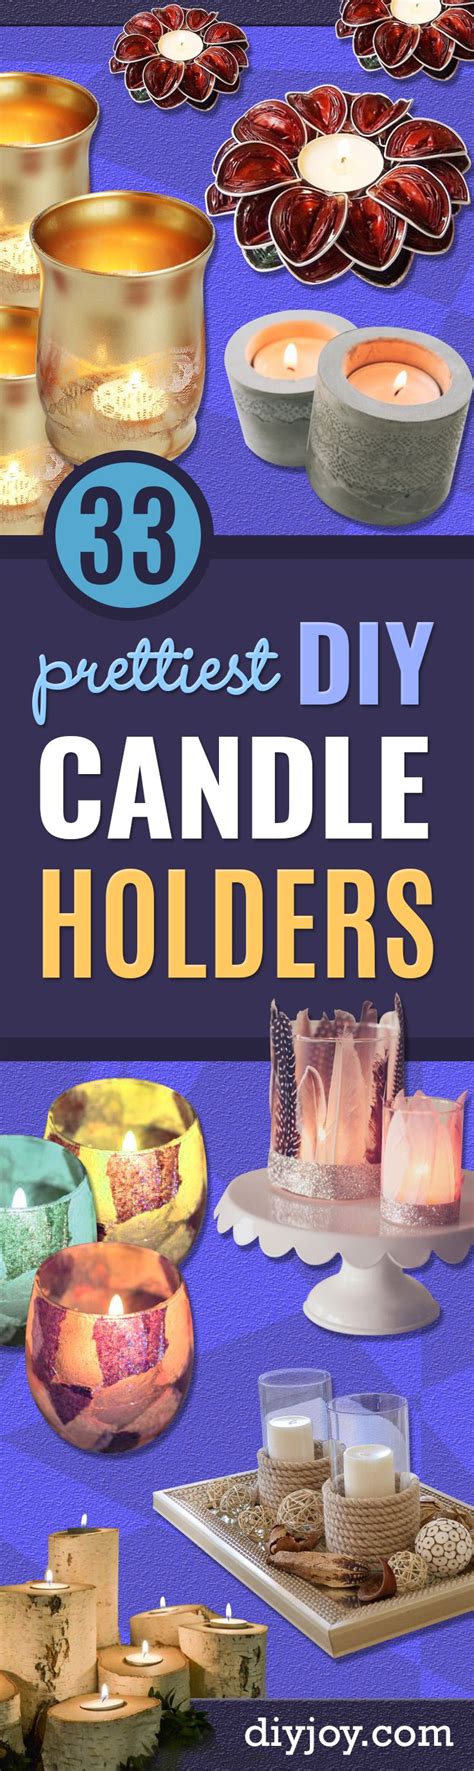 33 Diy Candle Holders To Light Up Your World Dollar Store Candles